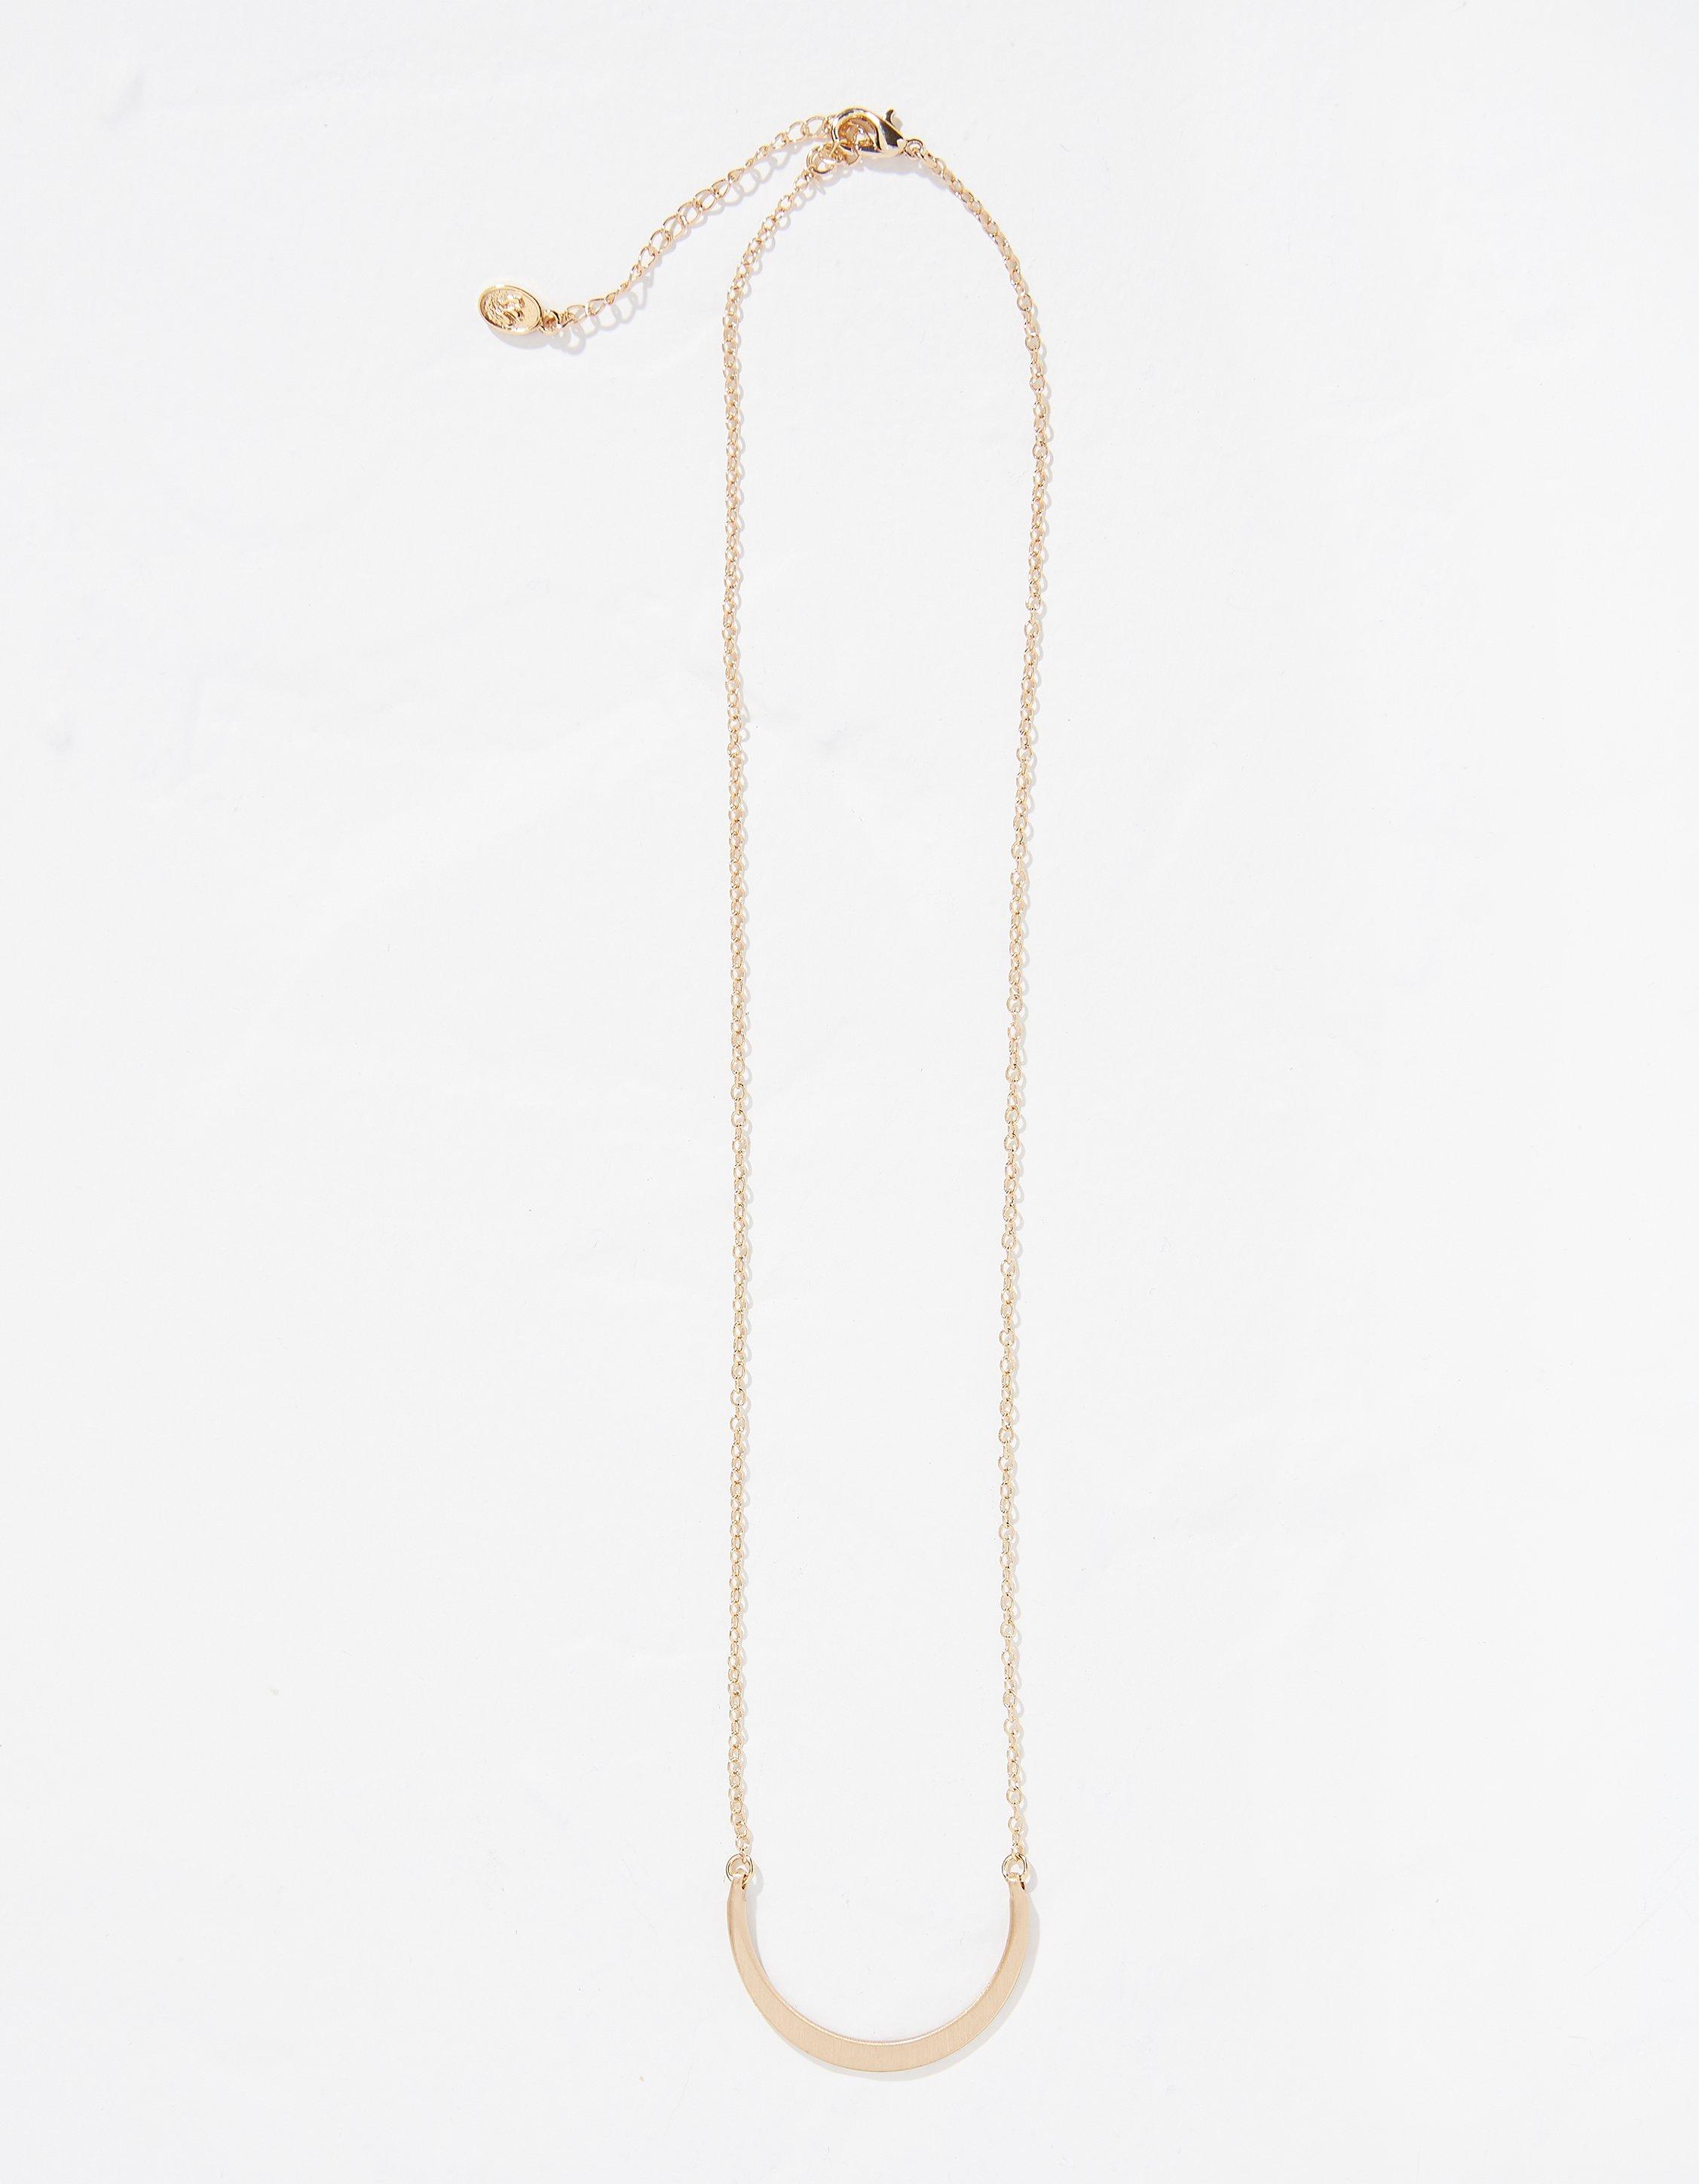 Gold Brushed Curv Necklace, Jewellery | FatFace.com